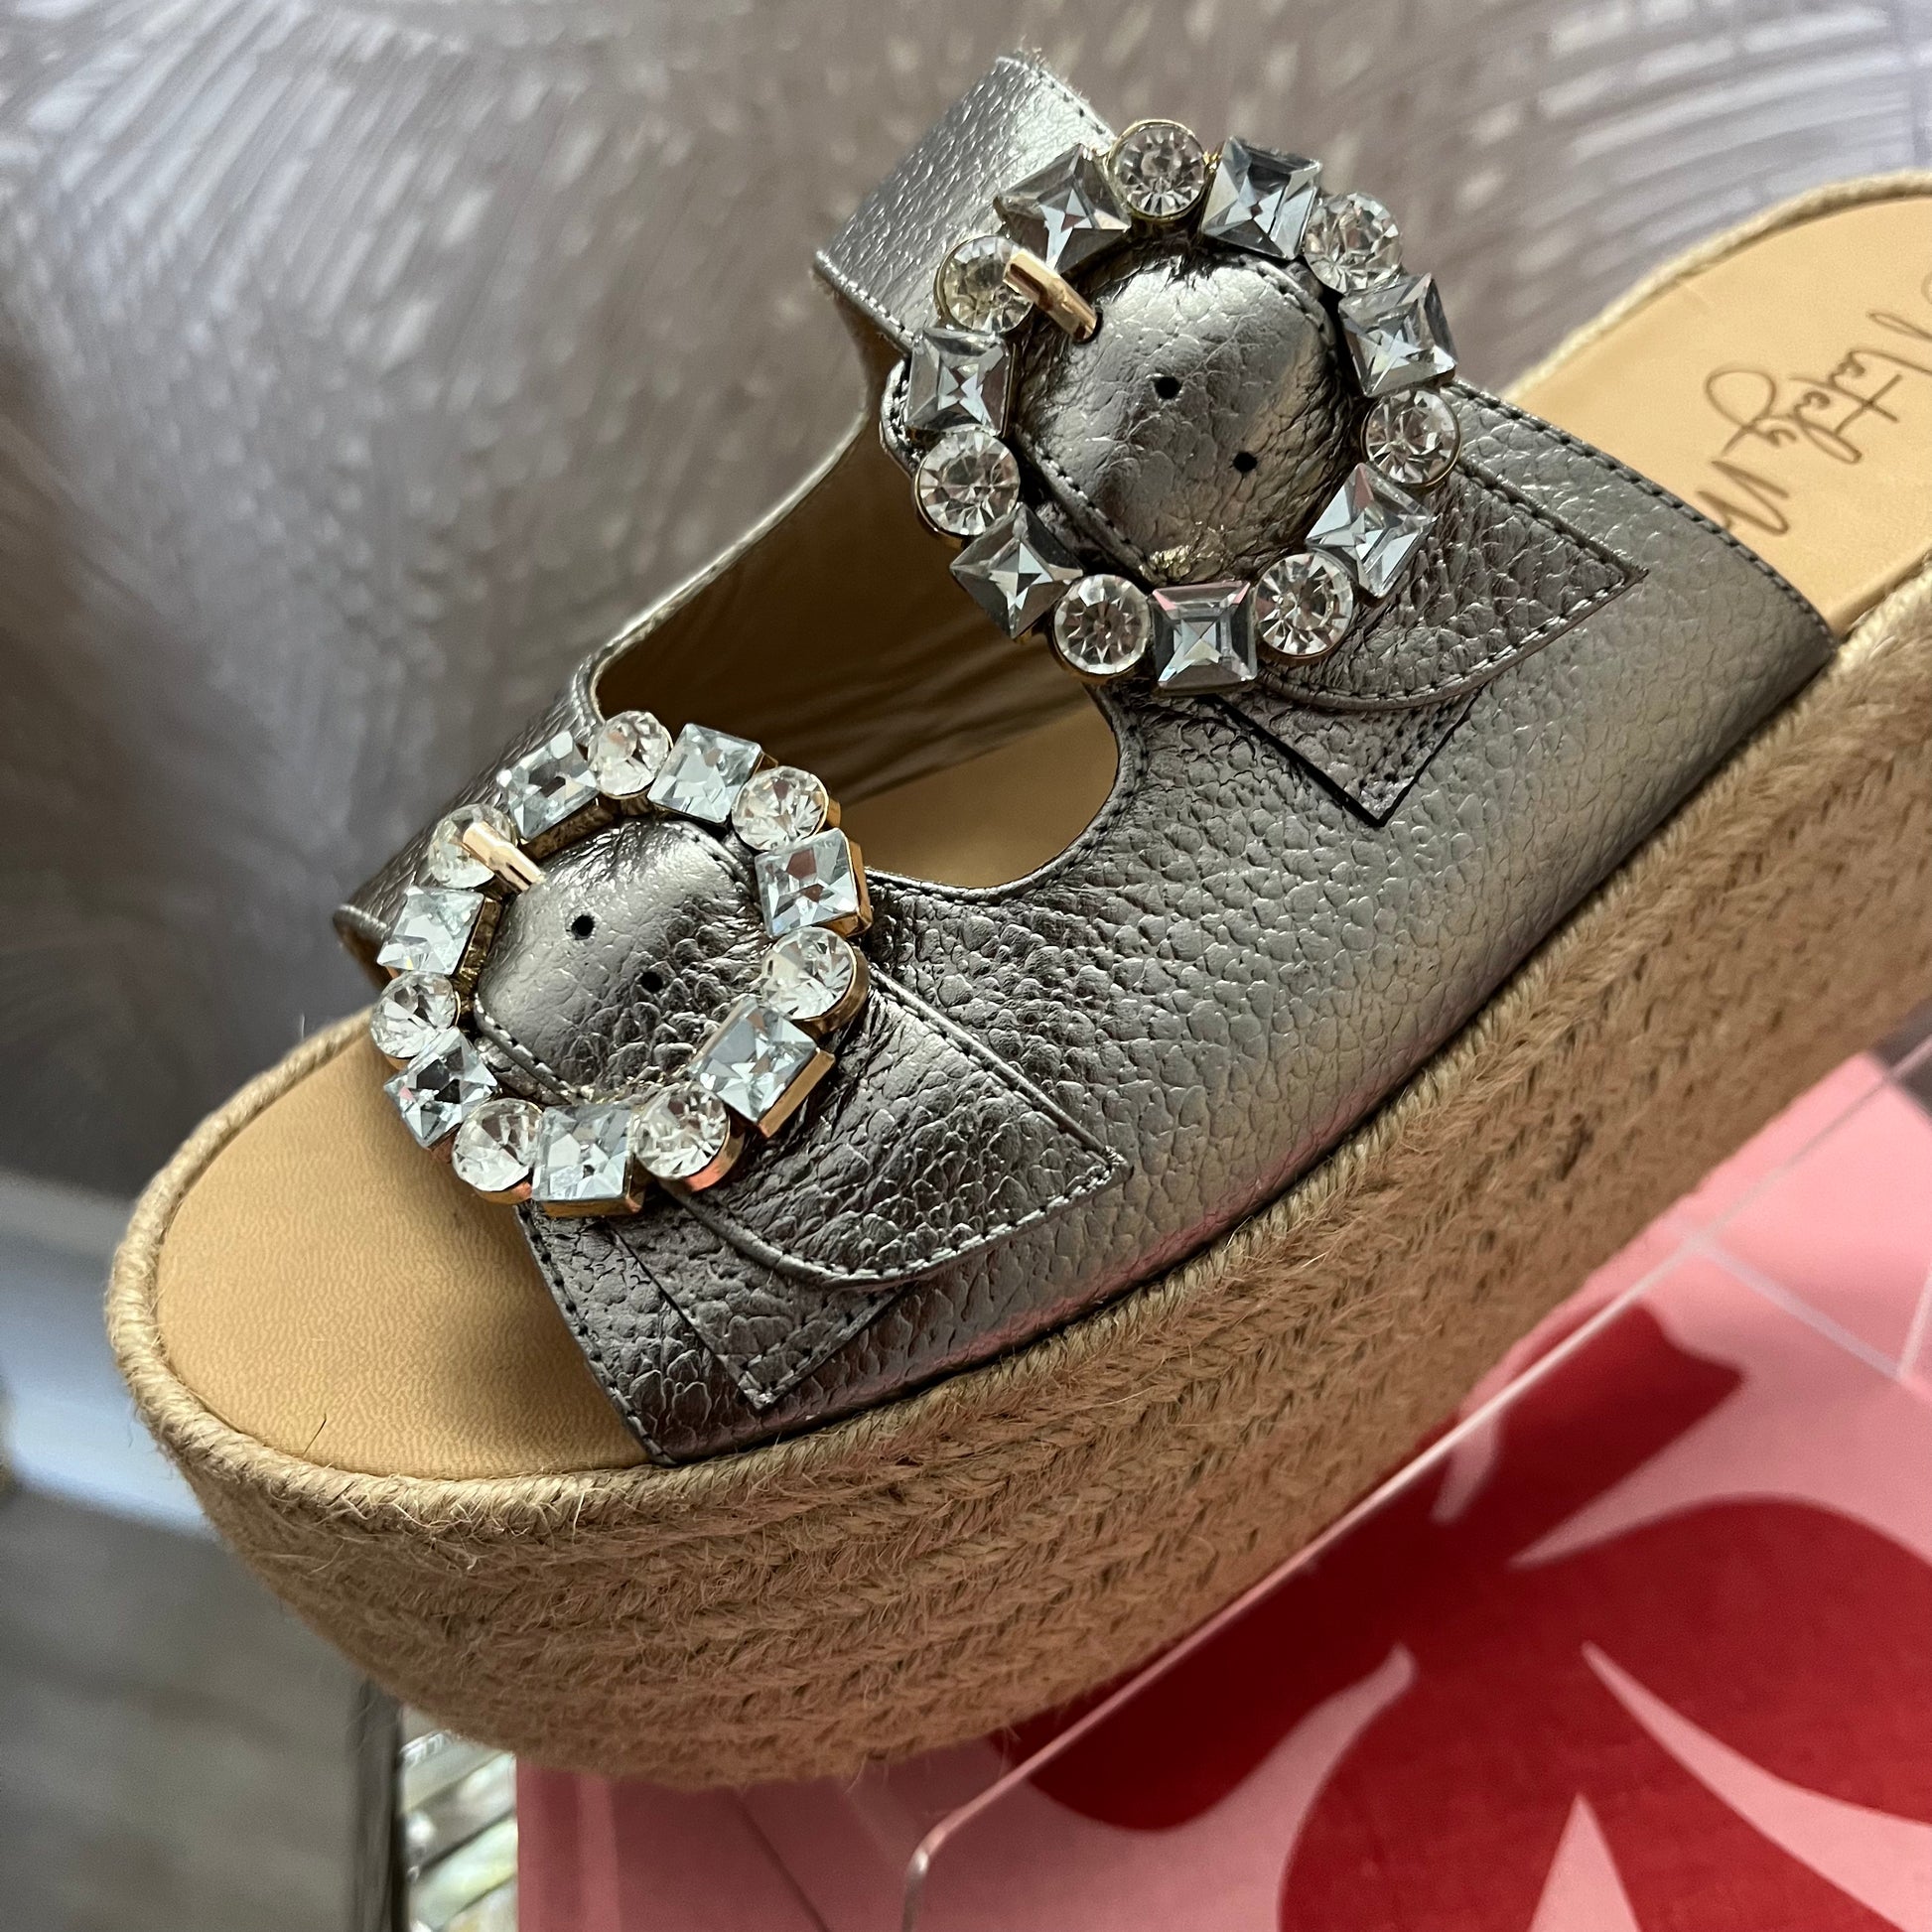 Brooke Espadrilles Plomo by Nataly Mendez Its base is lined with natural jute Leather upper with ornament Genuine Leather Handmade 3-inch heel height 2.5 inch platform